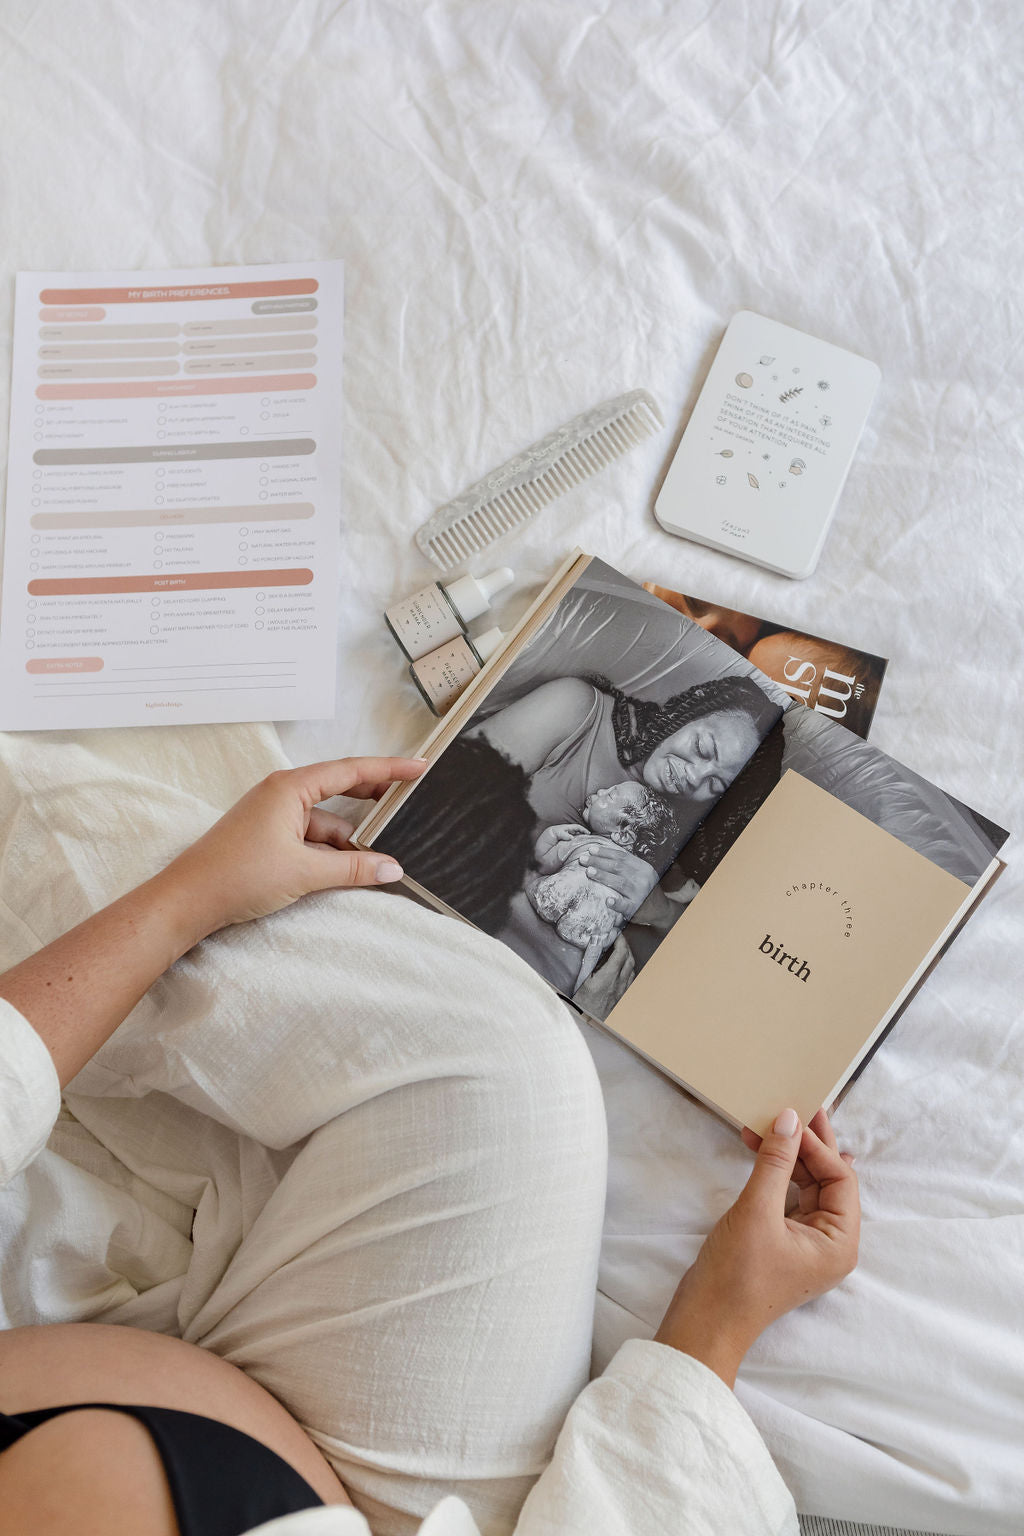 A pregnant woman reading a book on a bed.